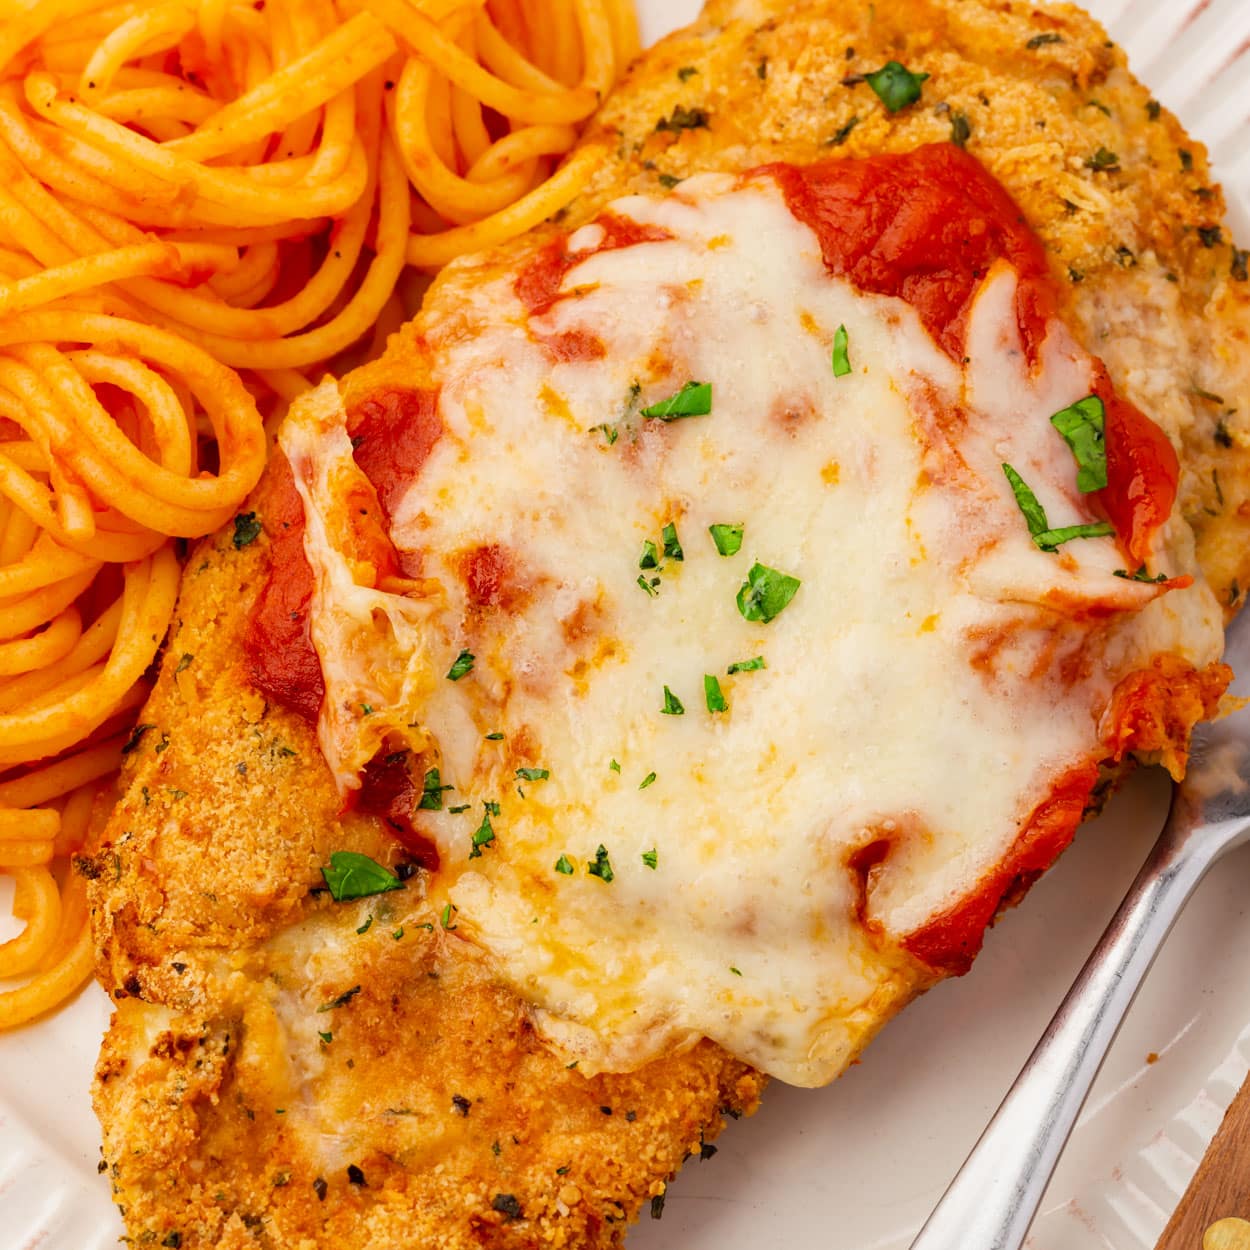 Closeup of a breaded chicken parmesan cutlet topped with tomato sauce and mozzarella cheese.